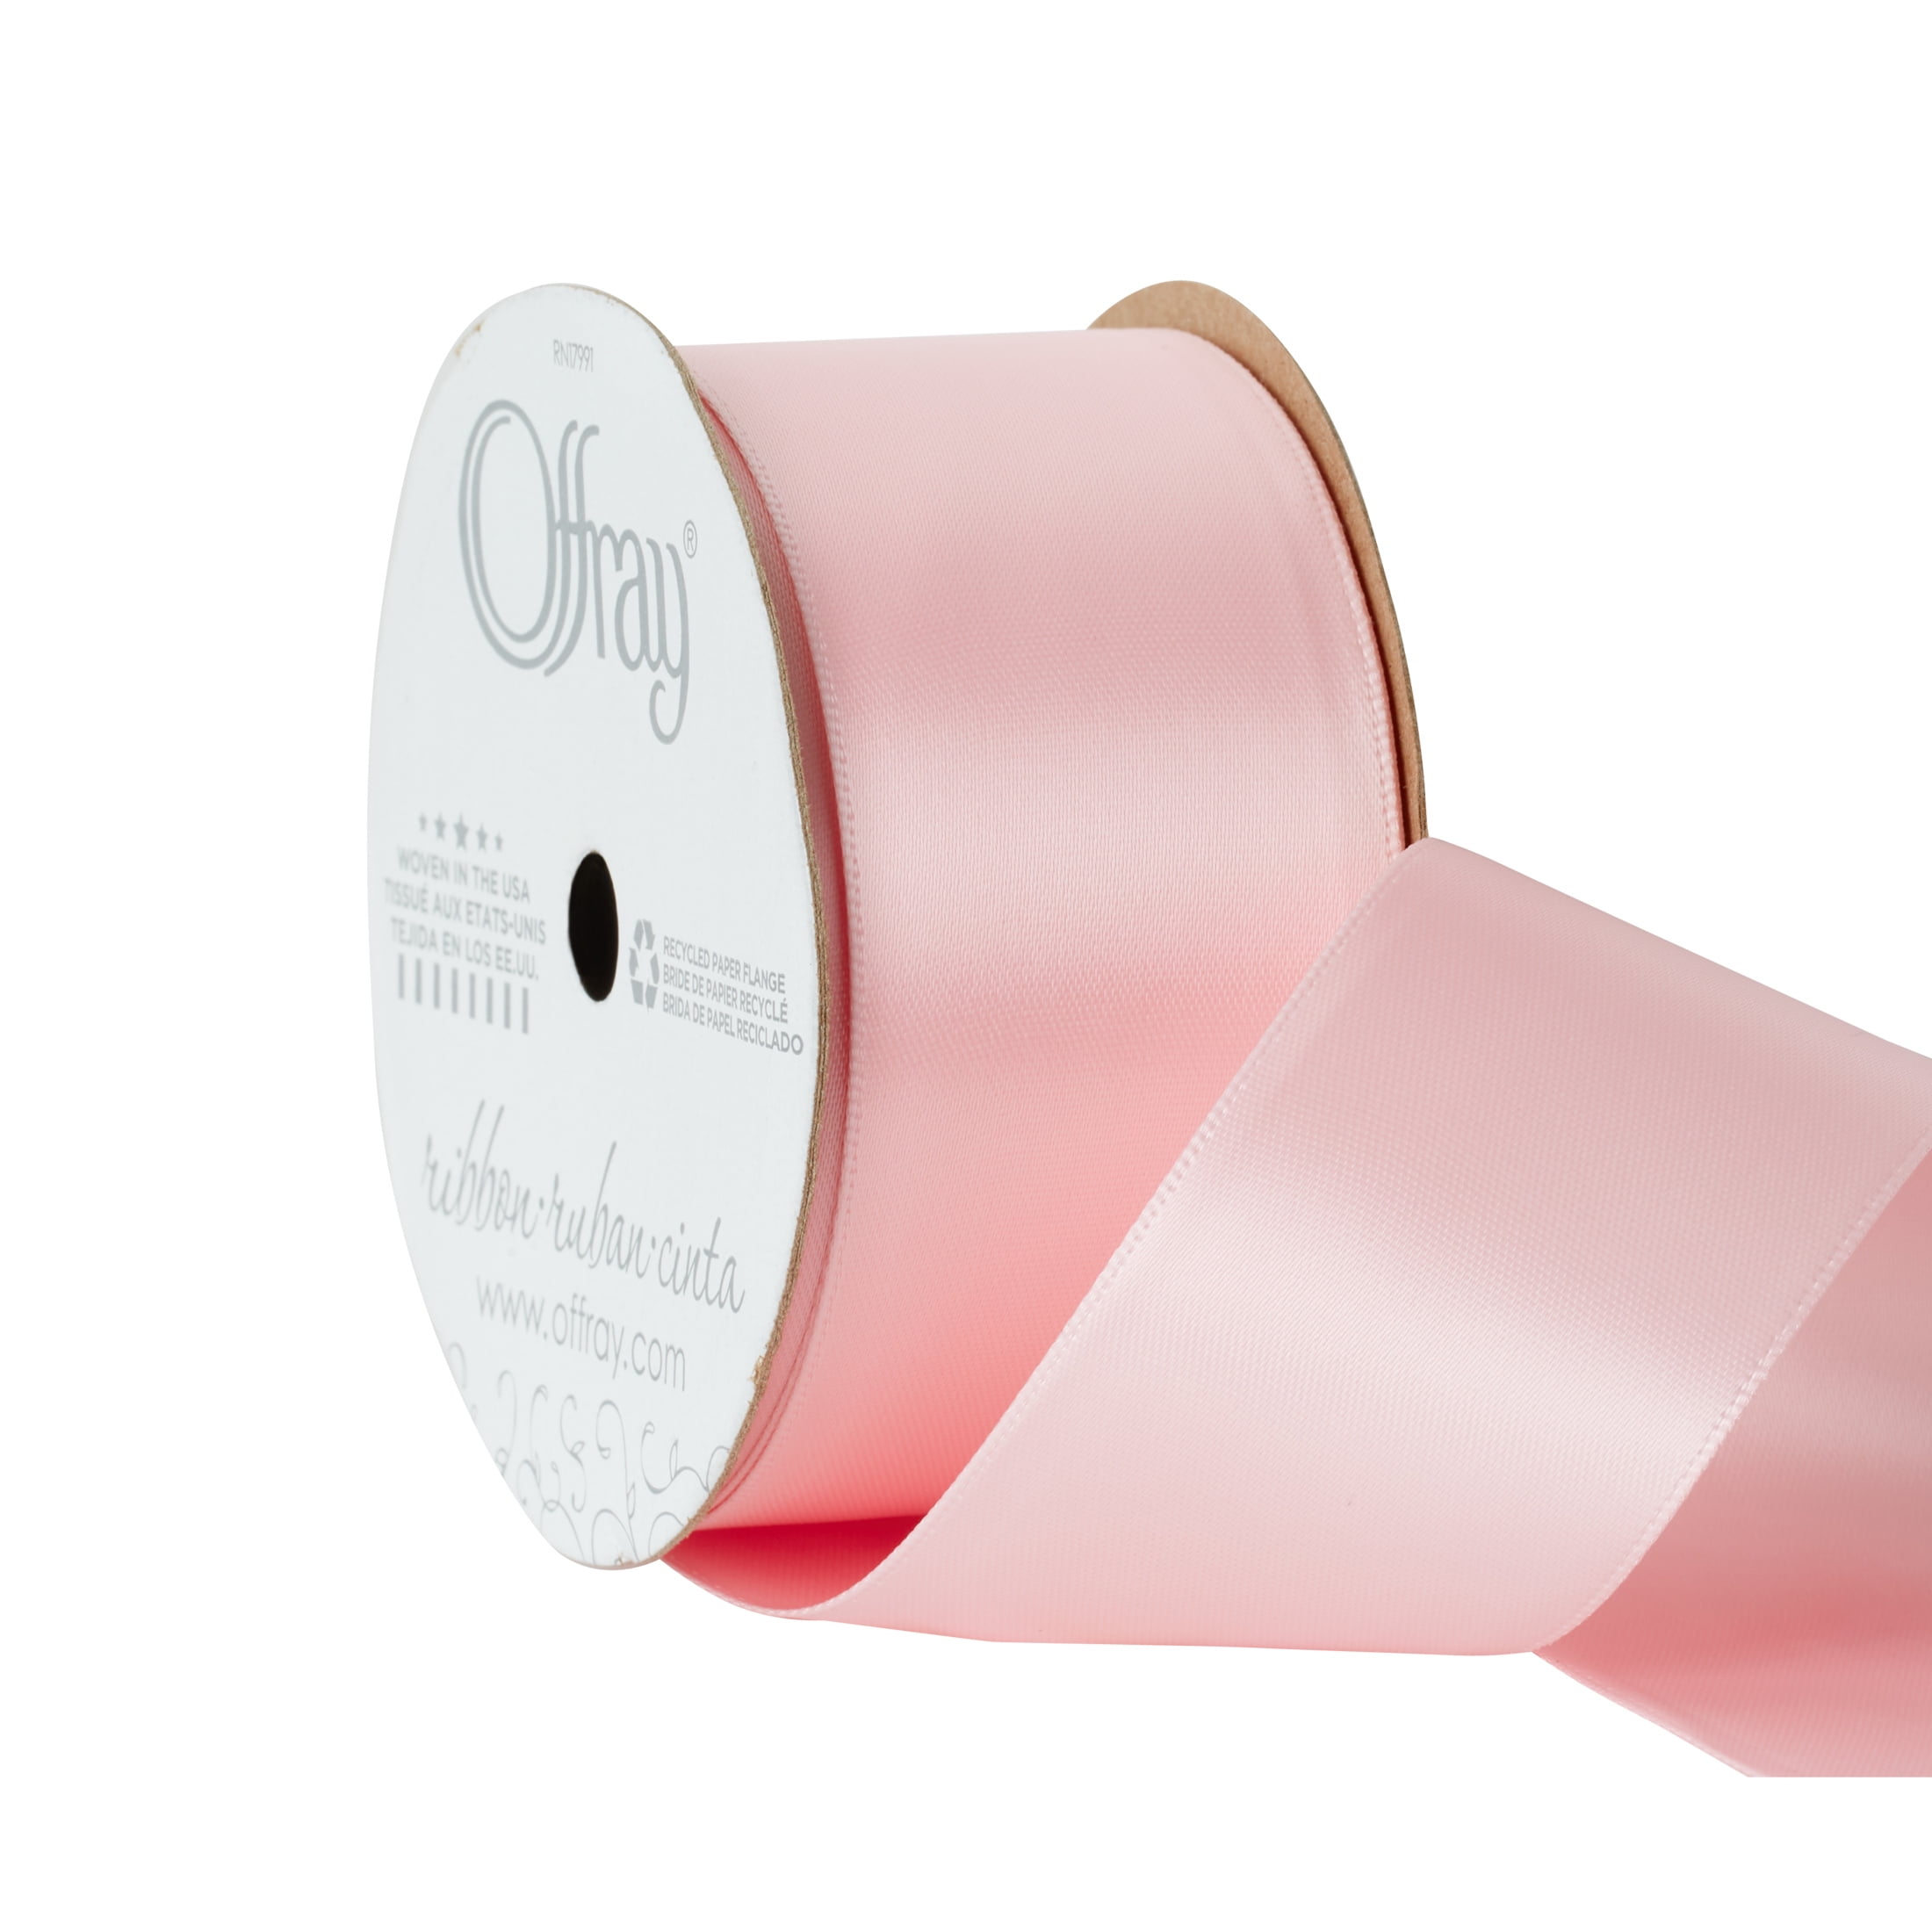 1/2 x 50 Yards Light Pink Double Faced Satin Ribbon,Solid Color High  Density Fabric Ribbon Rolls,Great for Gift Wrapping,Sewing,Crafts,DIY Bows  and